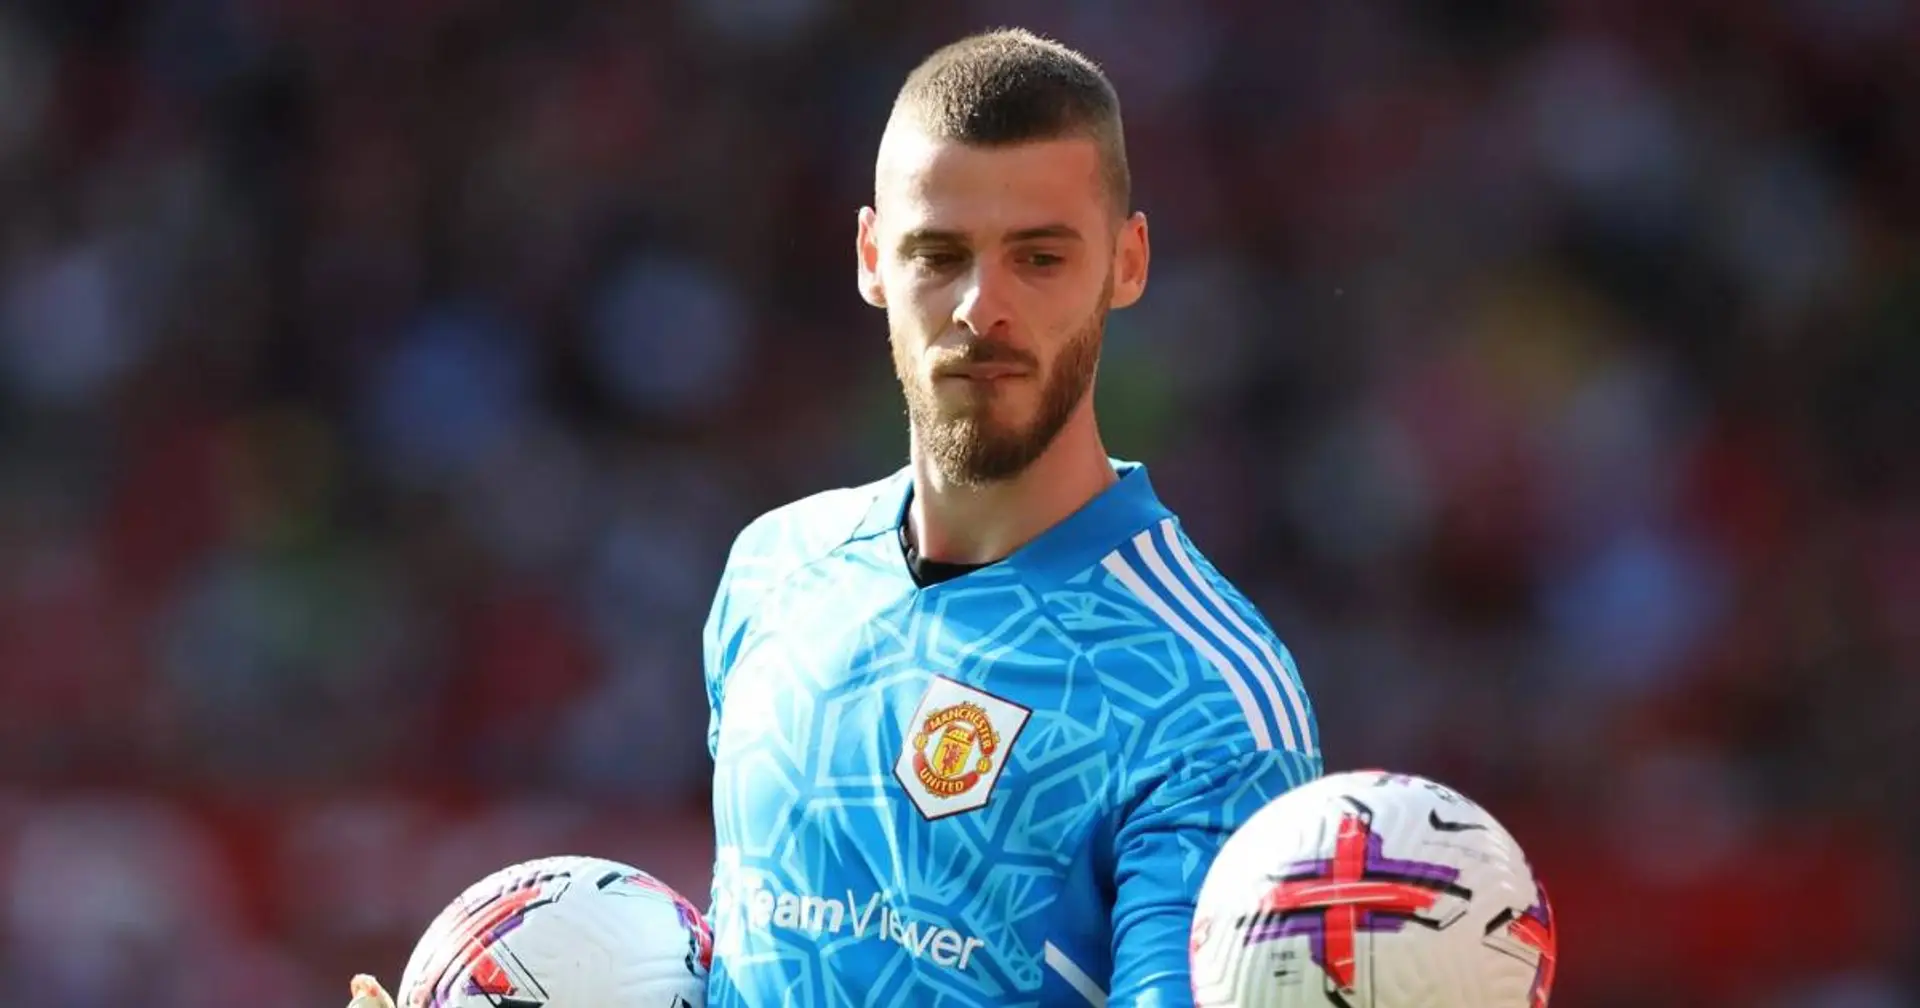 Newcastle told to sign De Gea & 3 more under-radar Man United stories